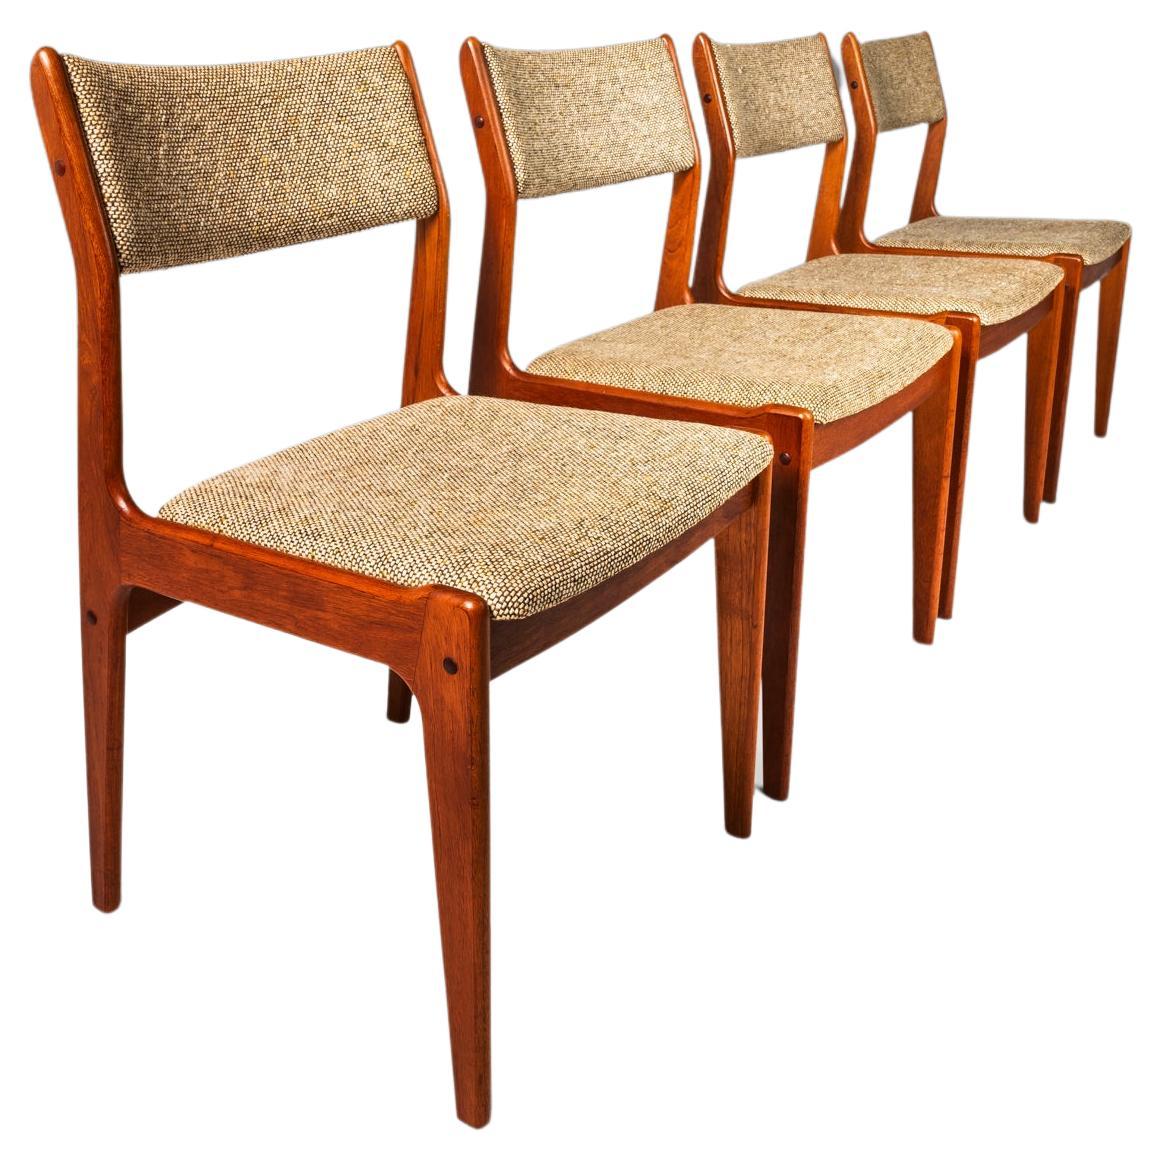 Set of 4 Danish Teak Dining Chairs by D-SCAN, Original Fabric, c. 1970s For Sale